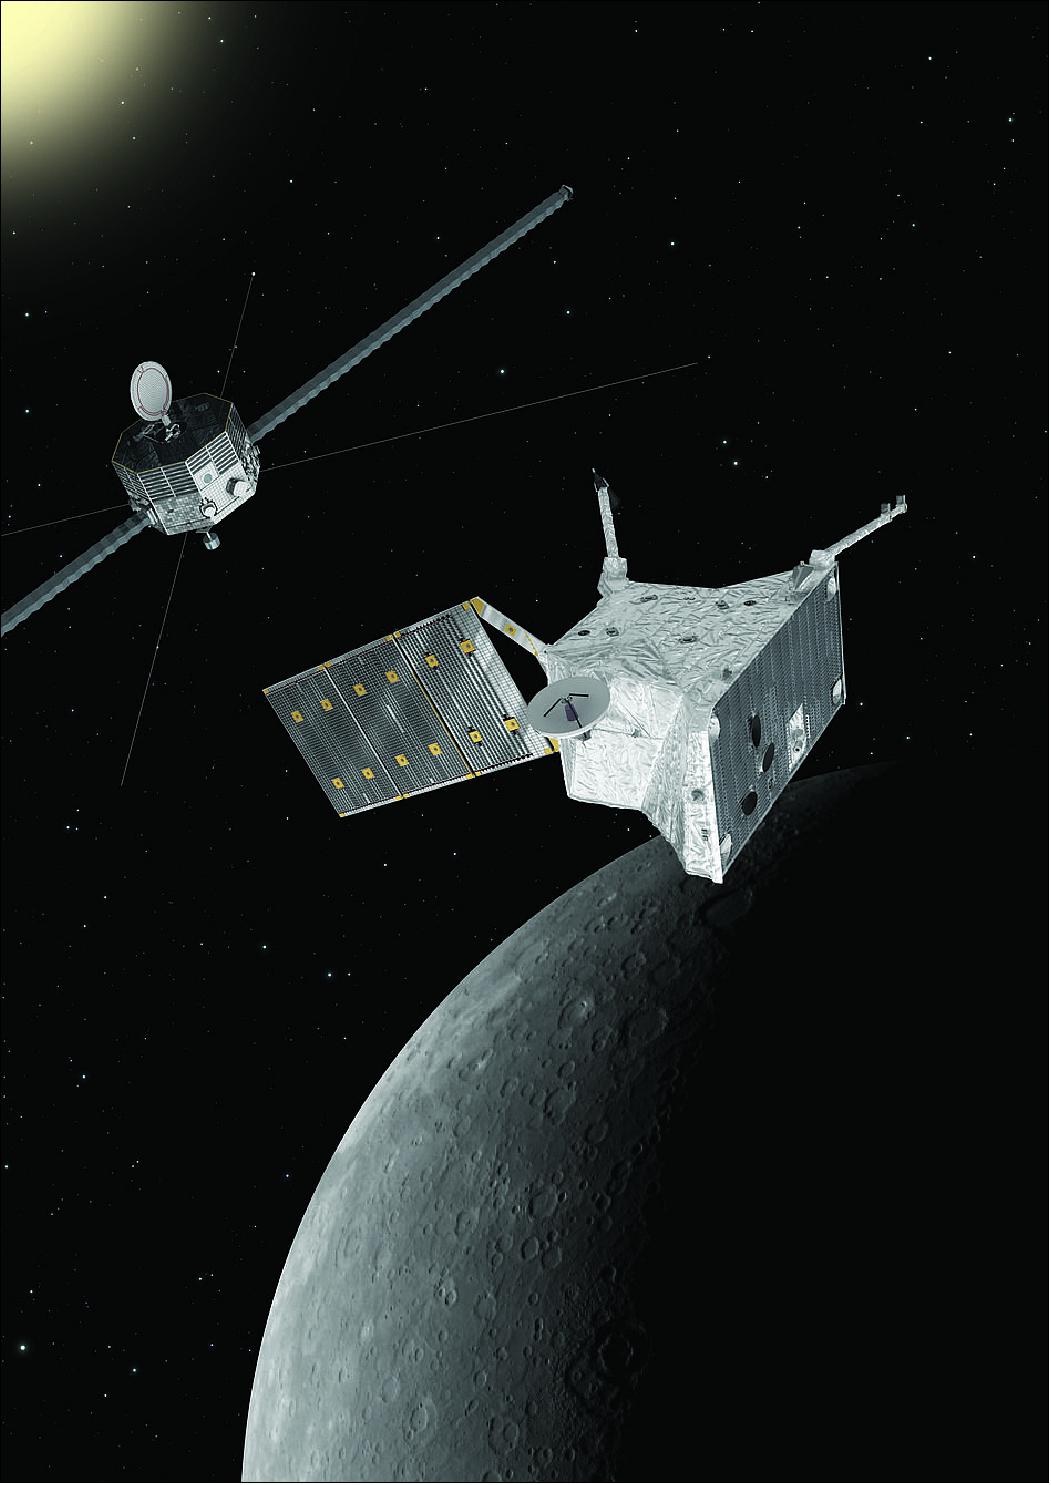 Figure 4: Artist's view of the BepiColombo spacecraft MPO (ESA, foreground) and MMO (JAXA, background) at Mercury (image credit: ESA/ATG medialab. The Mercury image was taken by NASA's Messenger spacecraft, image credit: NASA, JHU/APL, and Carnegie Institution) 17)